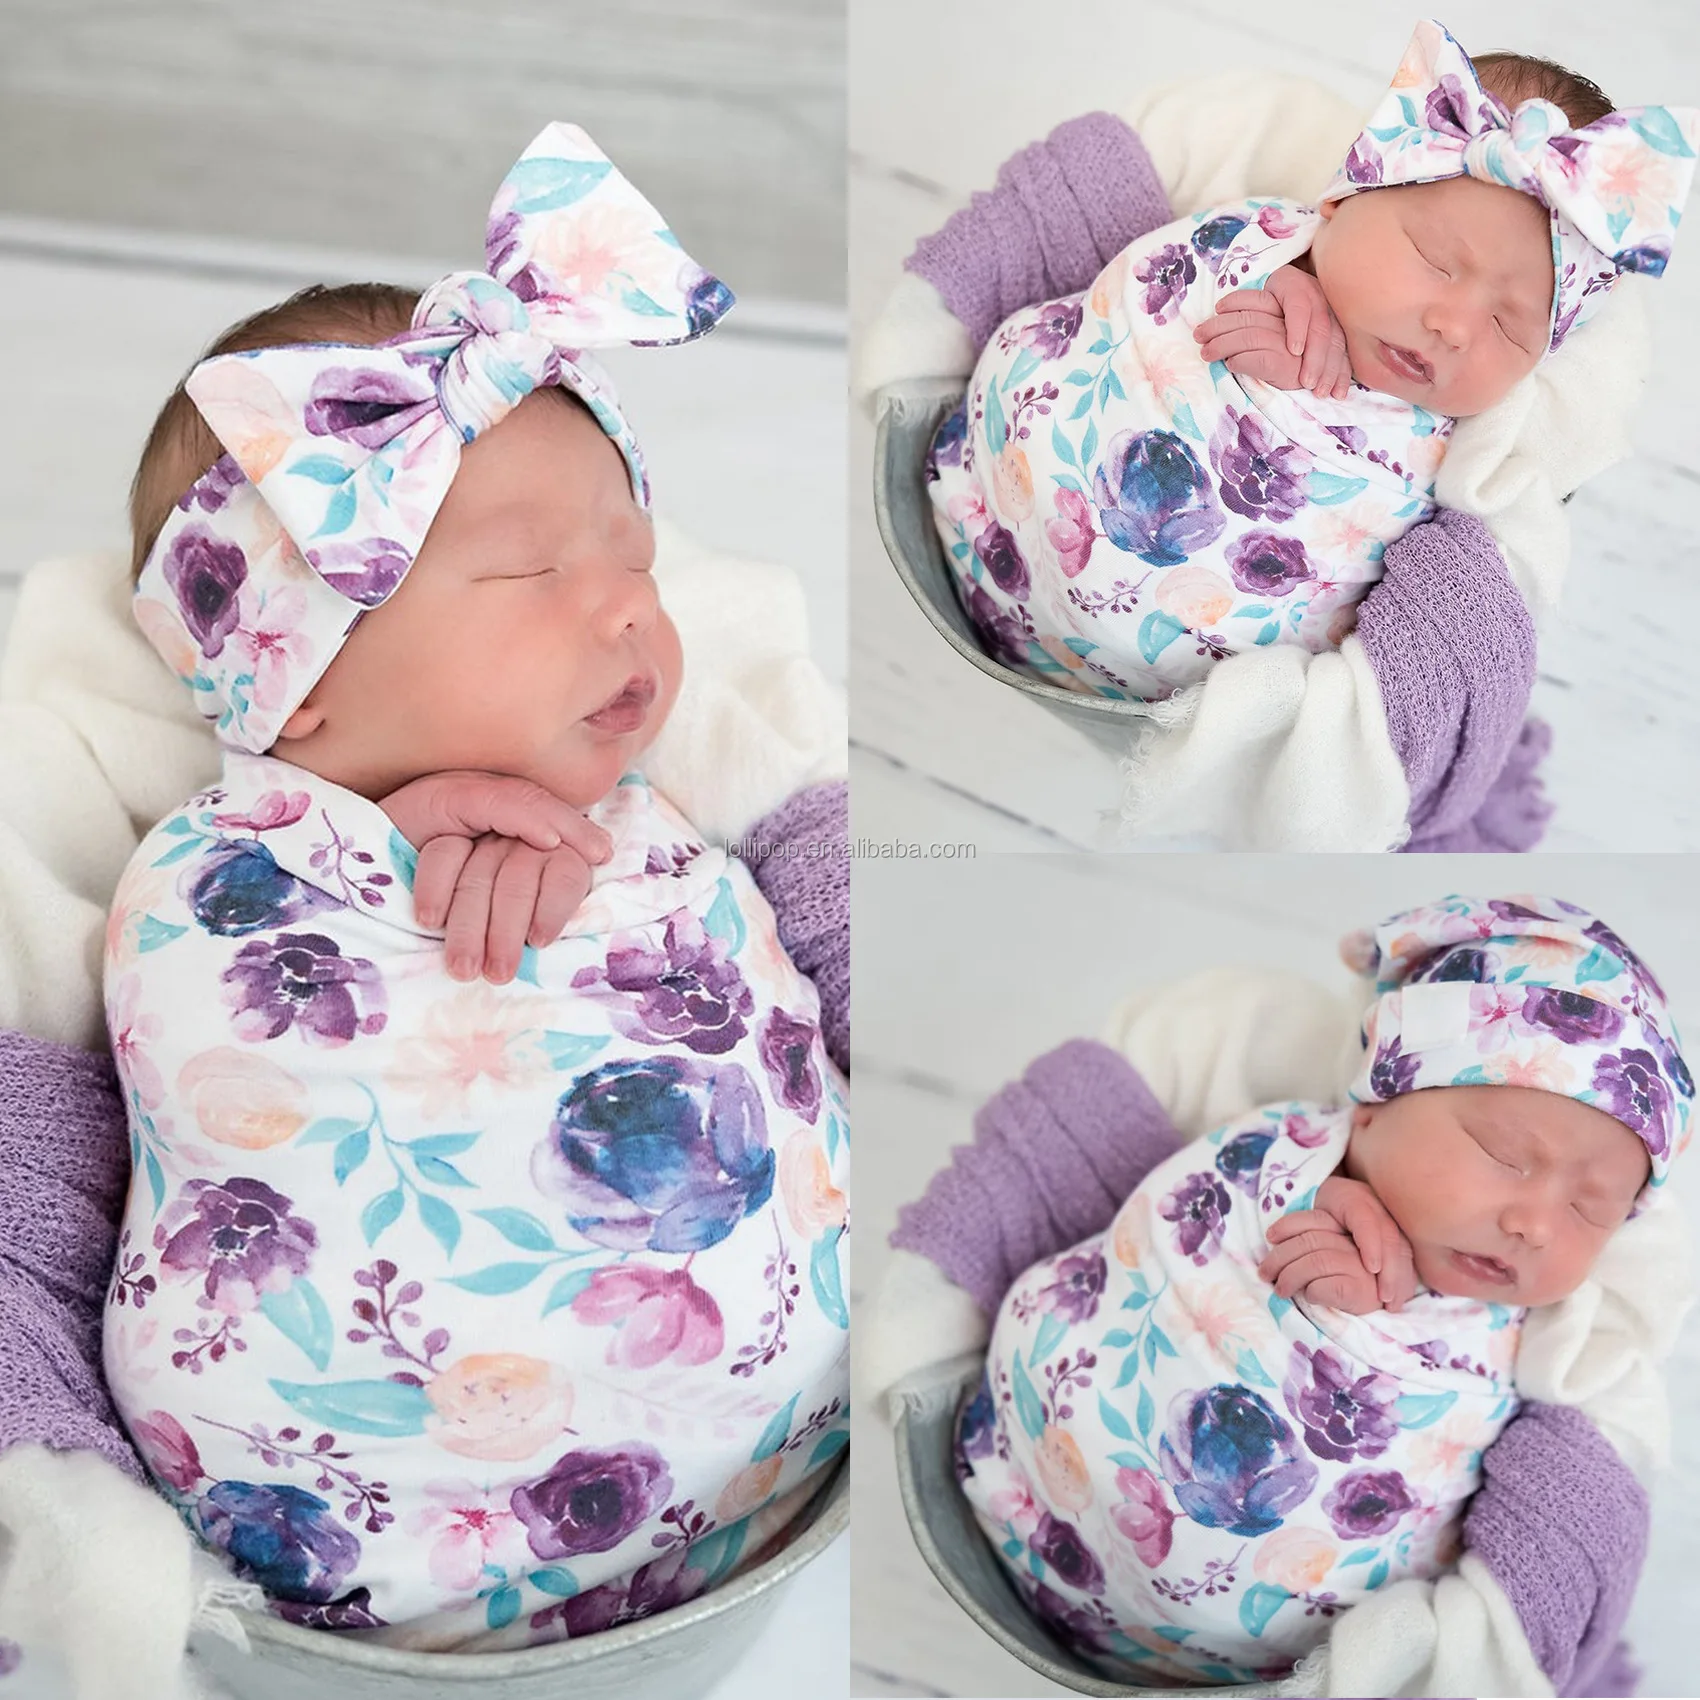 Newborn Receiving Blanket Headband Set Flower Print Baby Swaddle Cocoon Cotton Nursery Swaddle and Hair Band Set 3 Pack for Photograph Pack B Sleep Receiving Blankets